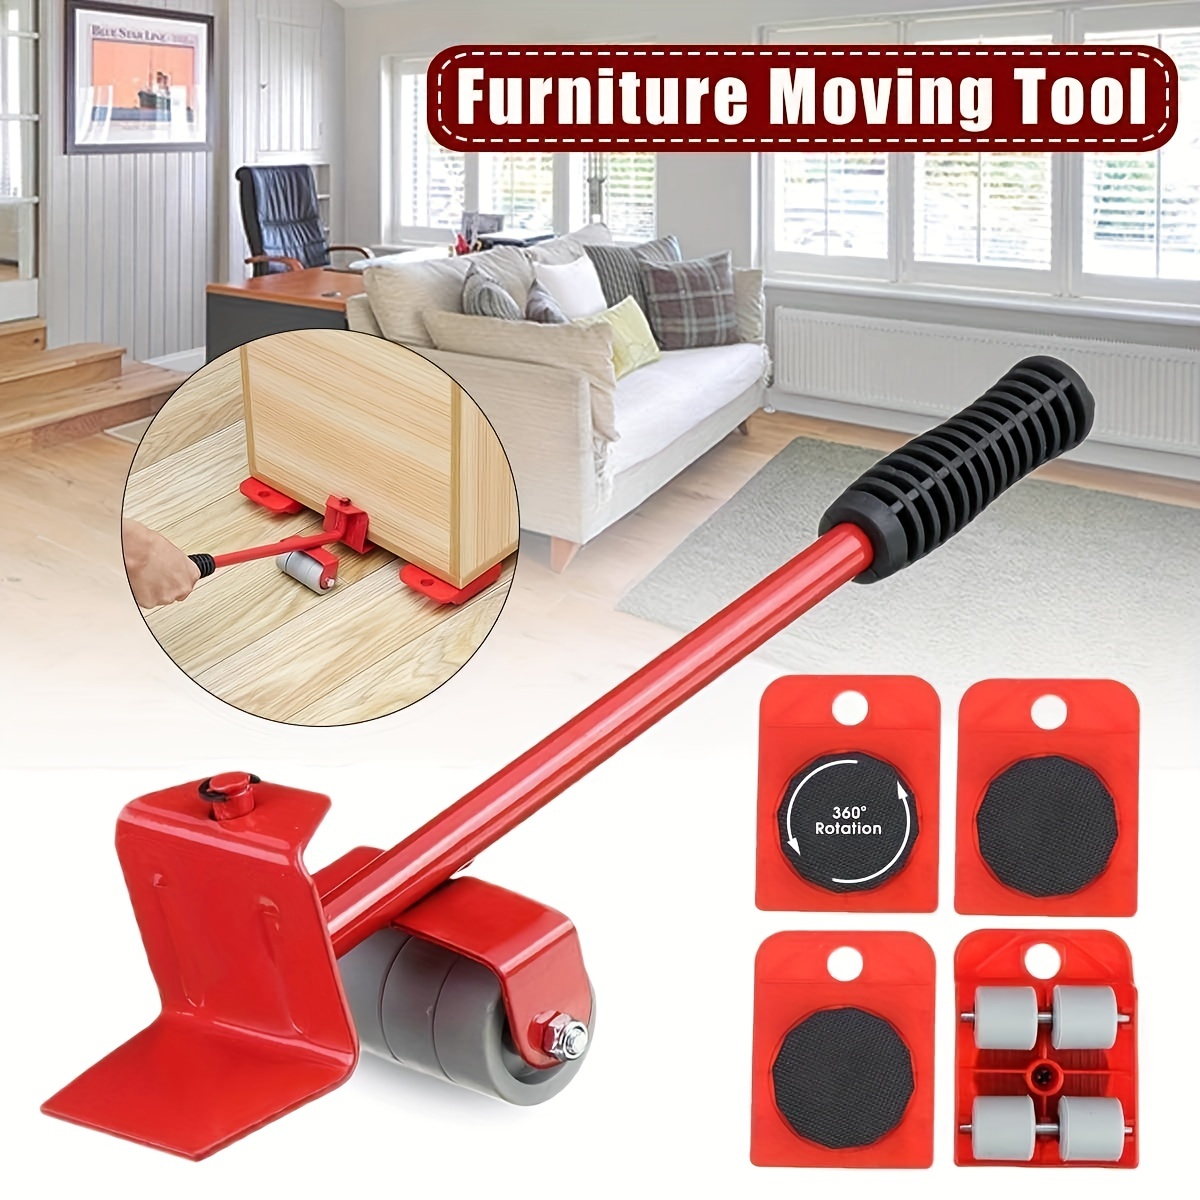 Set of 5 Furniture Lifter Tools furniture rollers